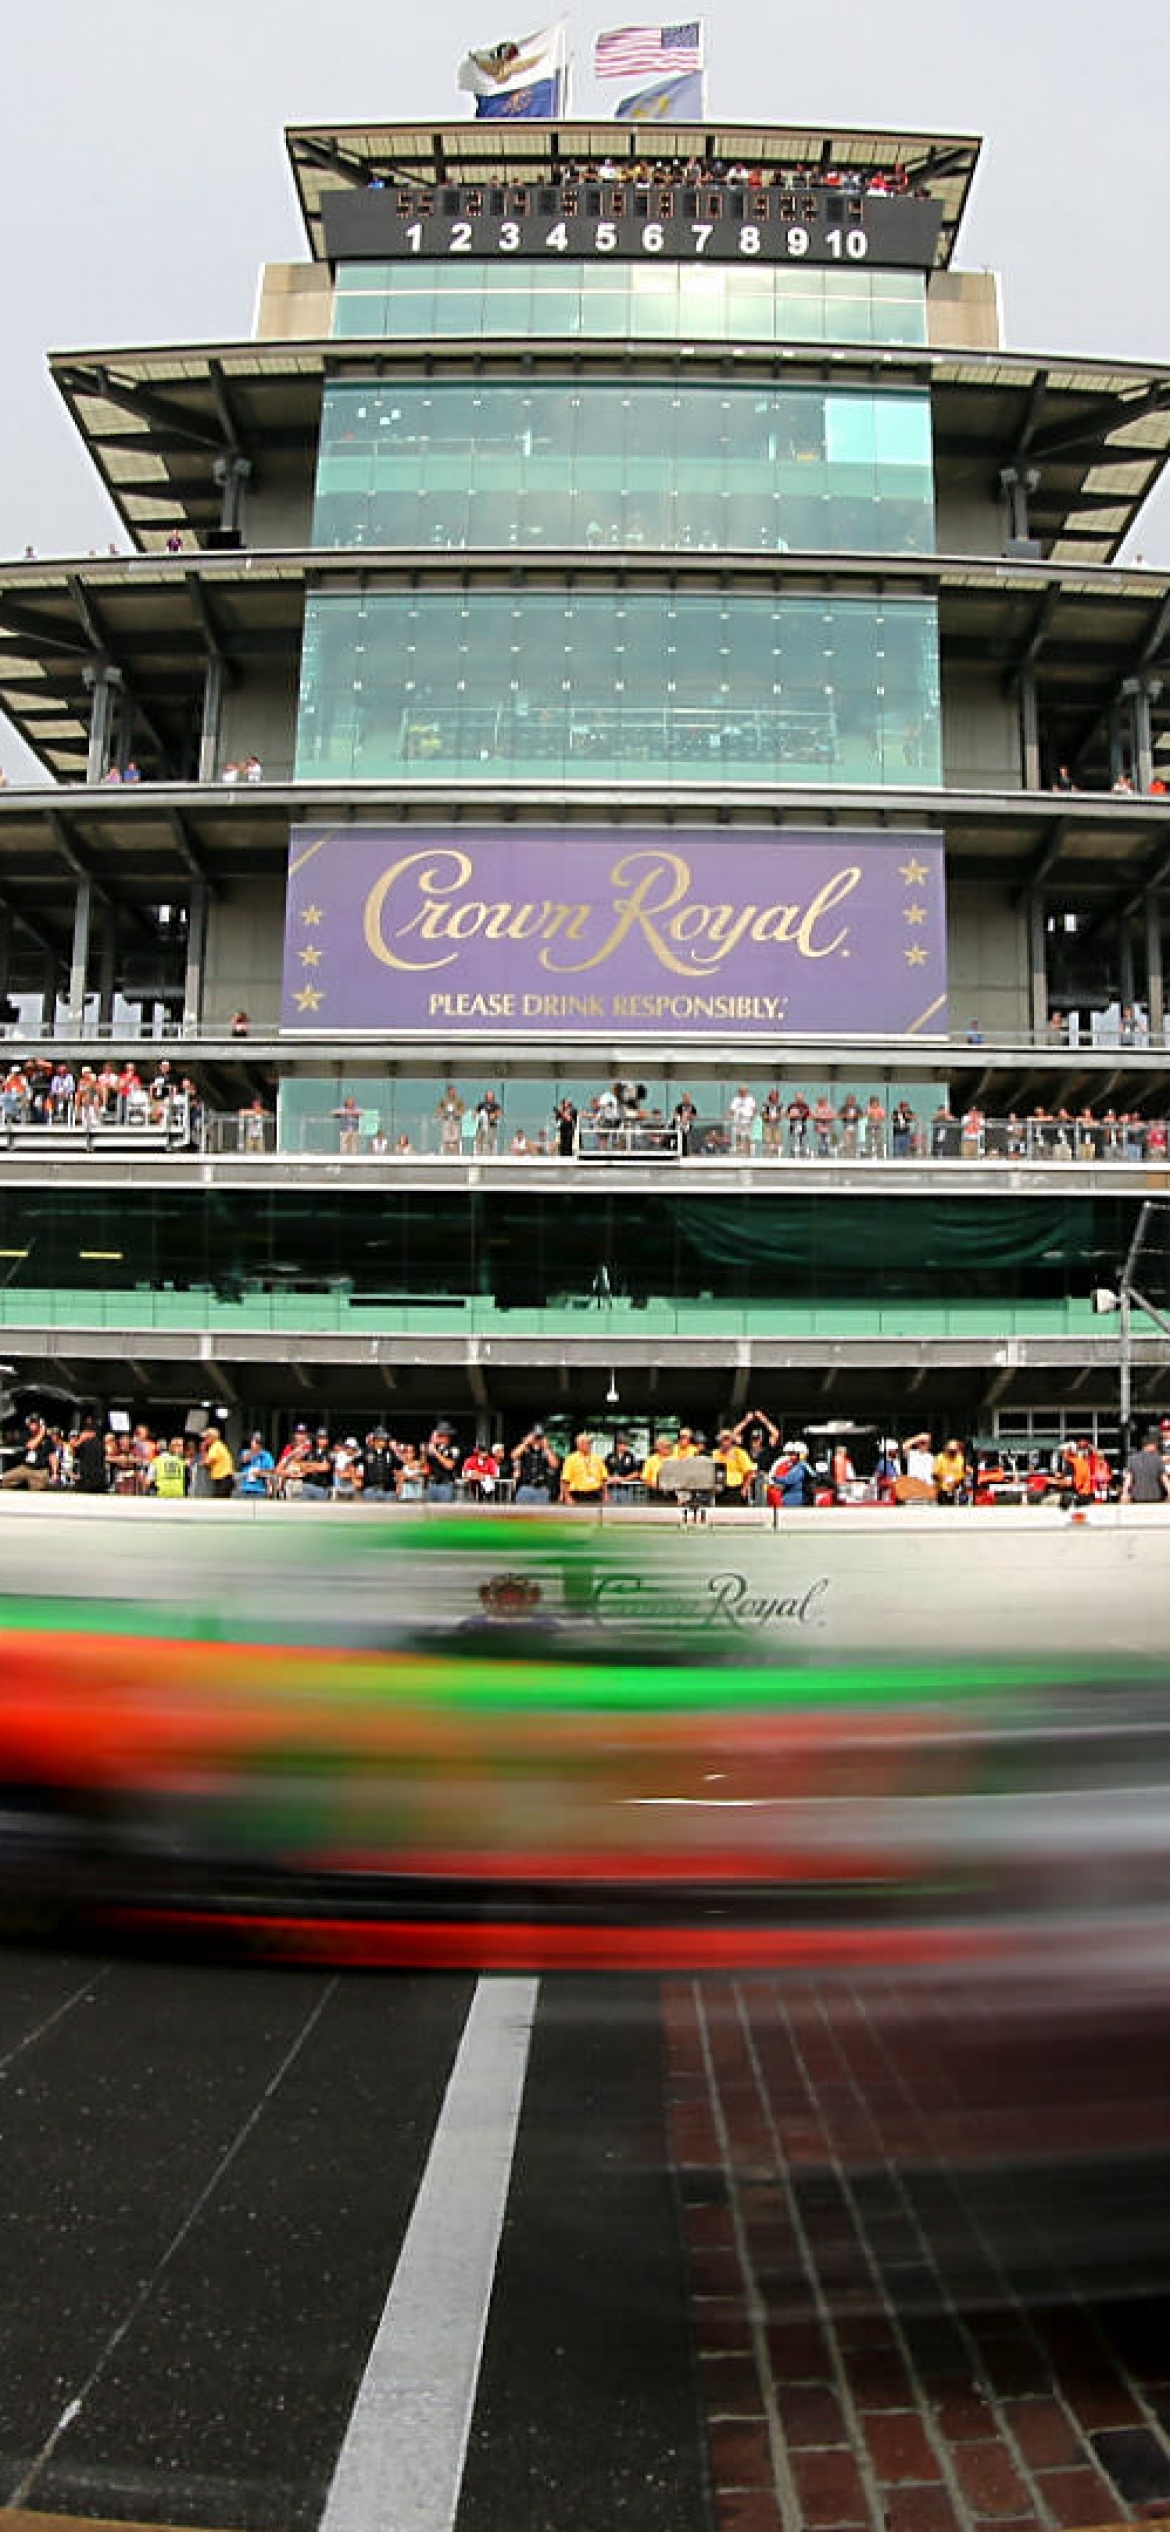 Indianapolis Motor Speedway, Full HD photo, Racing excitement, High-octane action, 1170x2540 HD Handy